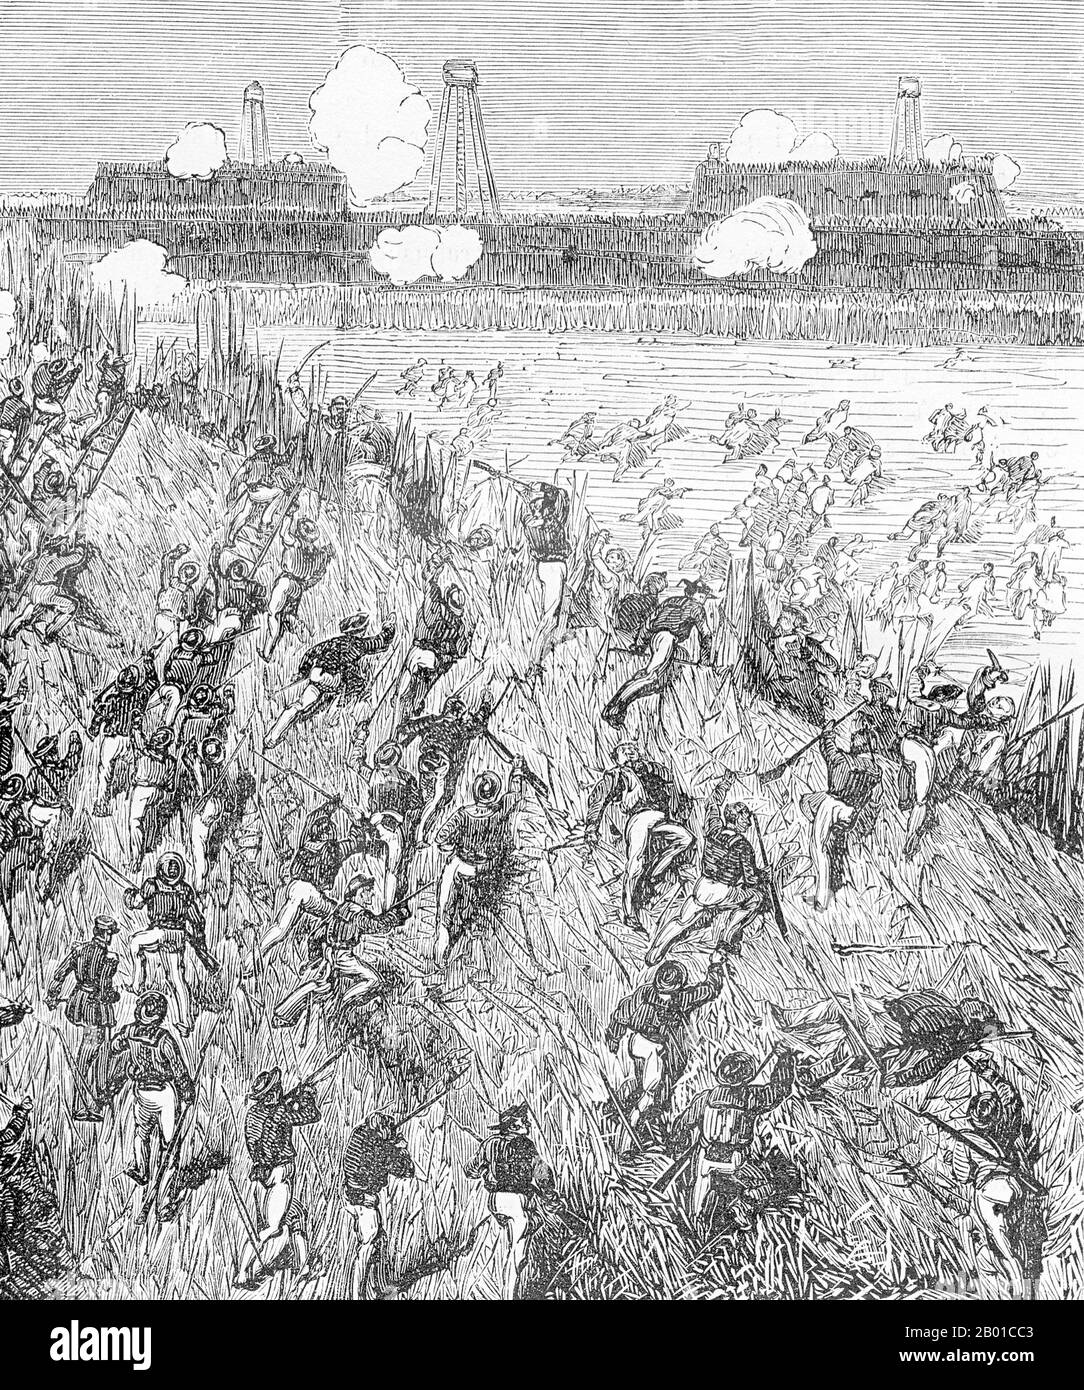 Vietnam: French sailors attack the Thuan An forts, 20 August 1883. Engraving by Charles-Lucien Huard (12 February 1837 - 22 January 1899), 1887.  The Tonkin Campaign (French: Campagne du Tonkin) was an armed conflict fought between June 1883 and April 1886 by the French against, variously, the Vietnamese, Liu Yongfu's Black Flag Army and the Chinese Guangxi and Yunnan armies to occupy Tonkin (northern Vietnam) and entrench a French protectorate there. Stock Photo